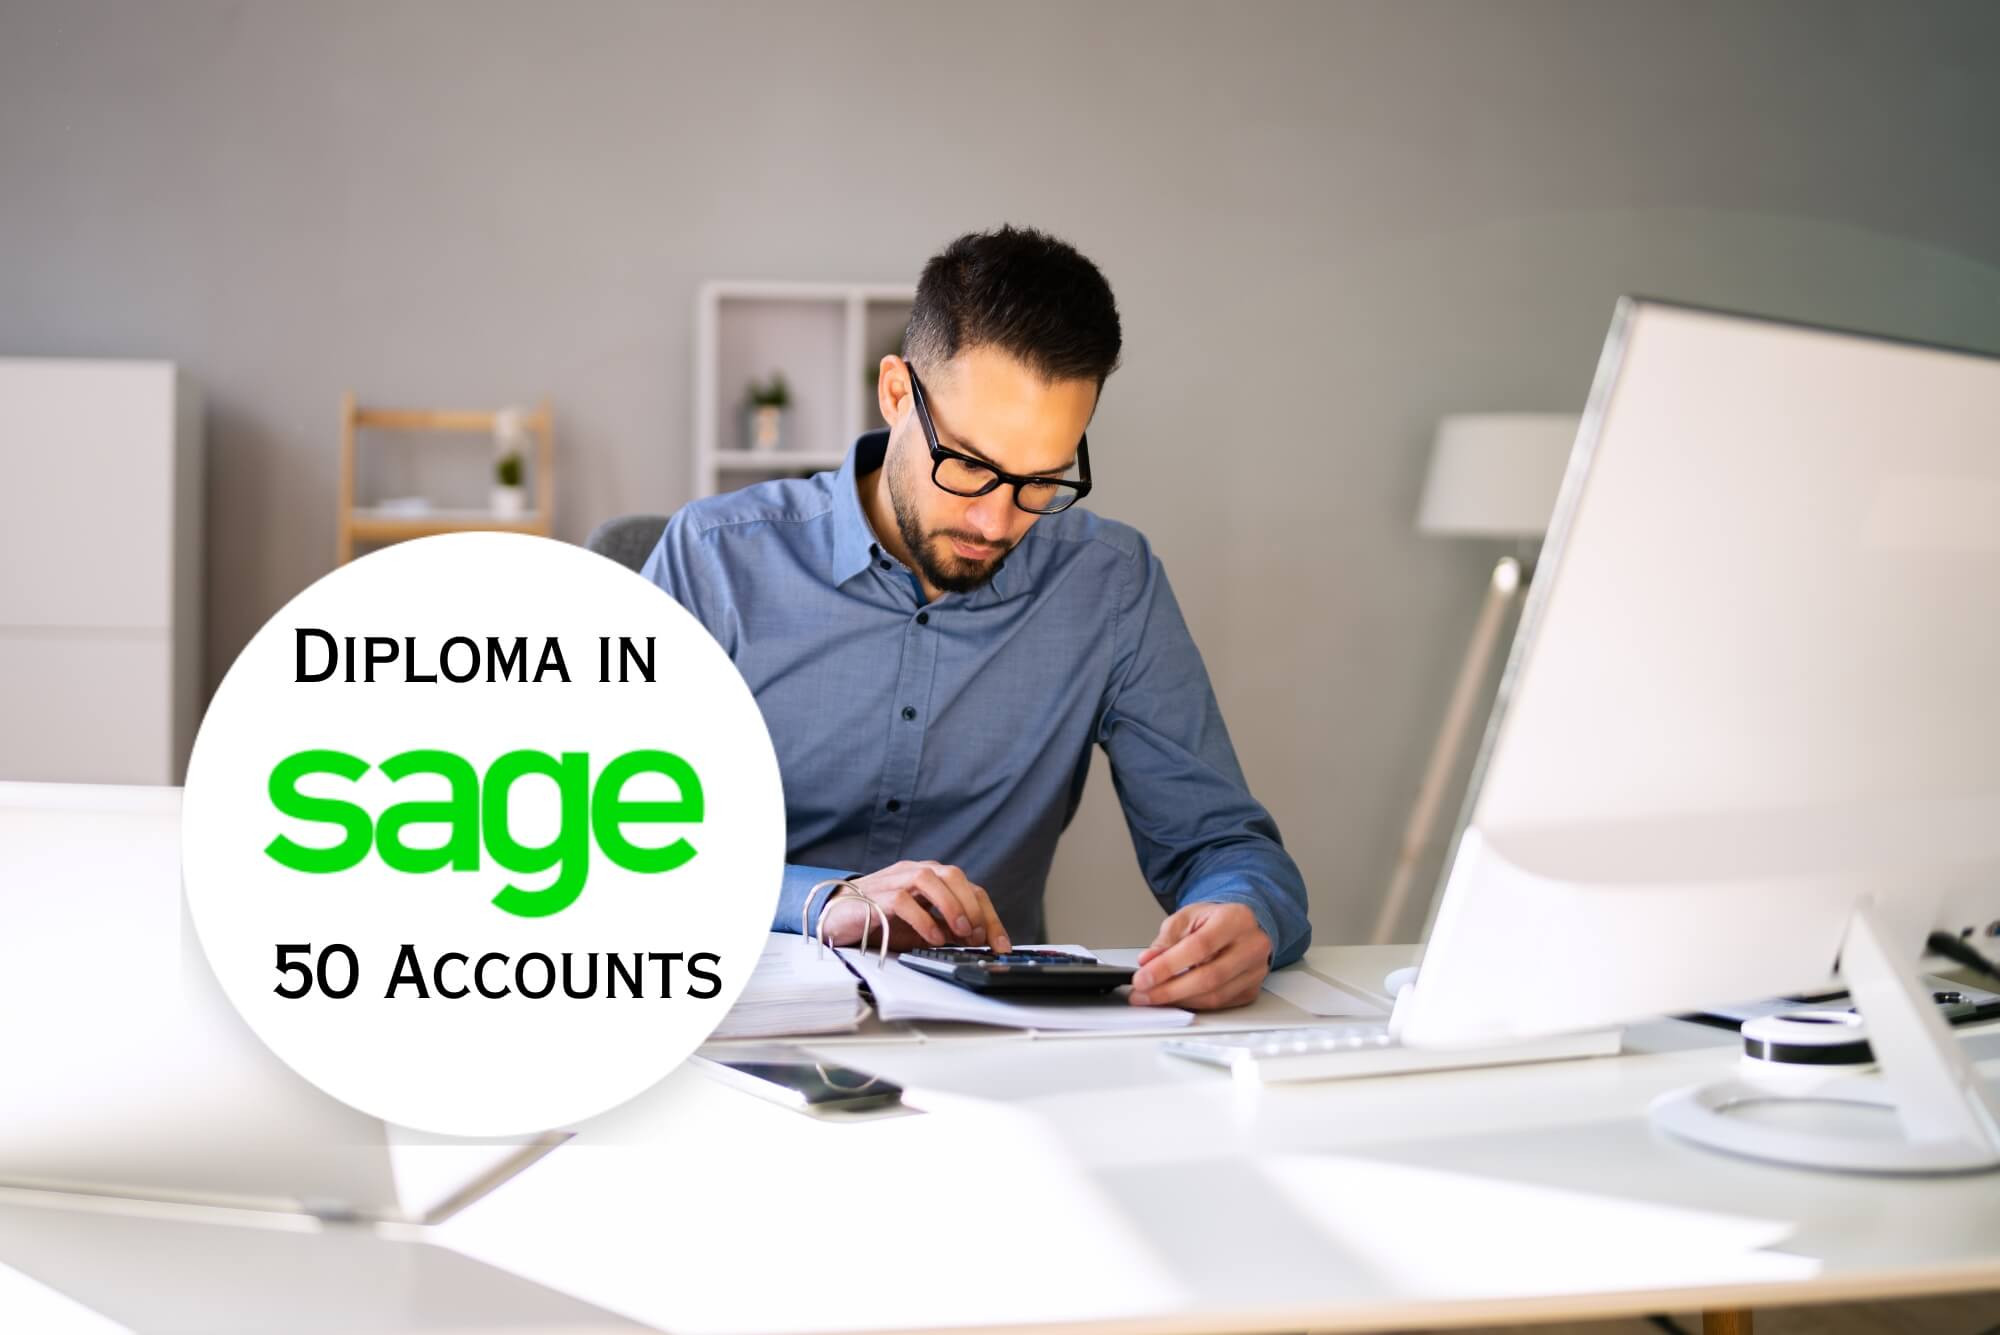 Diploma in Sage 50 Accounts (Updated)